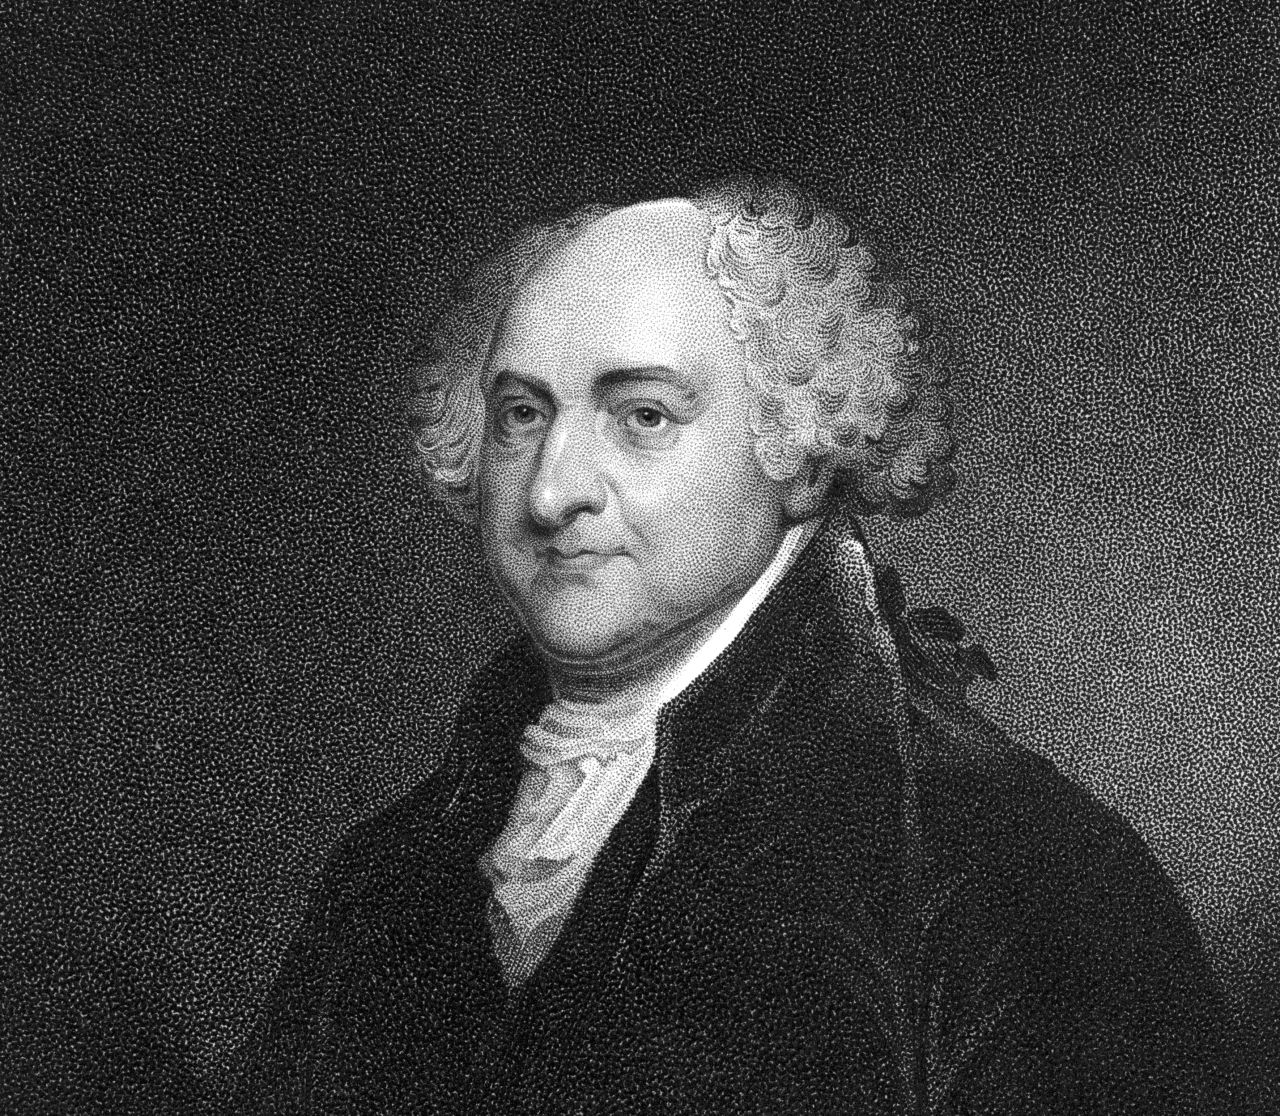 A<a href="http://www.ncbi.nlm.nih.gov/pubmed/16462555" target="_blank" target="_blank"> study </a>by Duke psychiatrists found John Adams would have been diagnosed with a bipolar disorder.